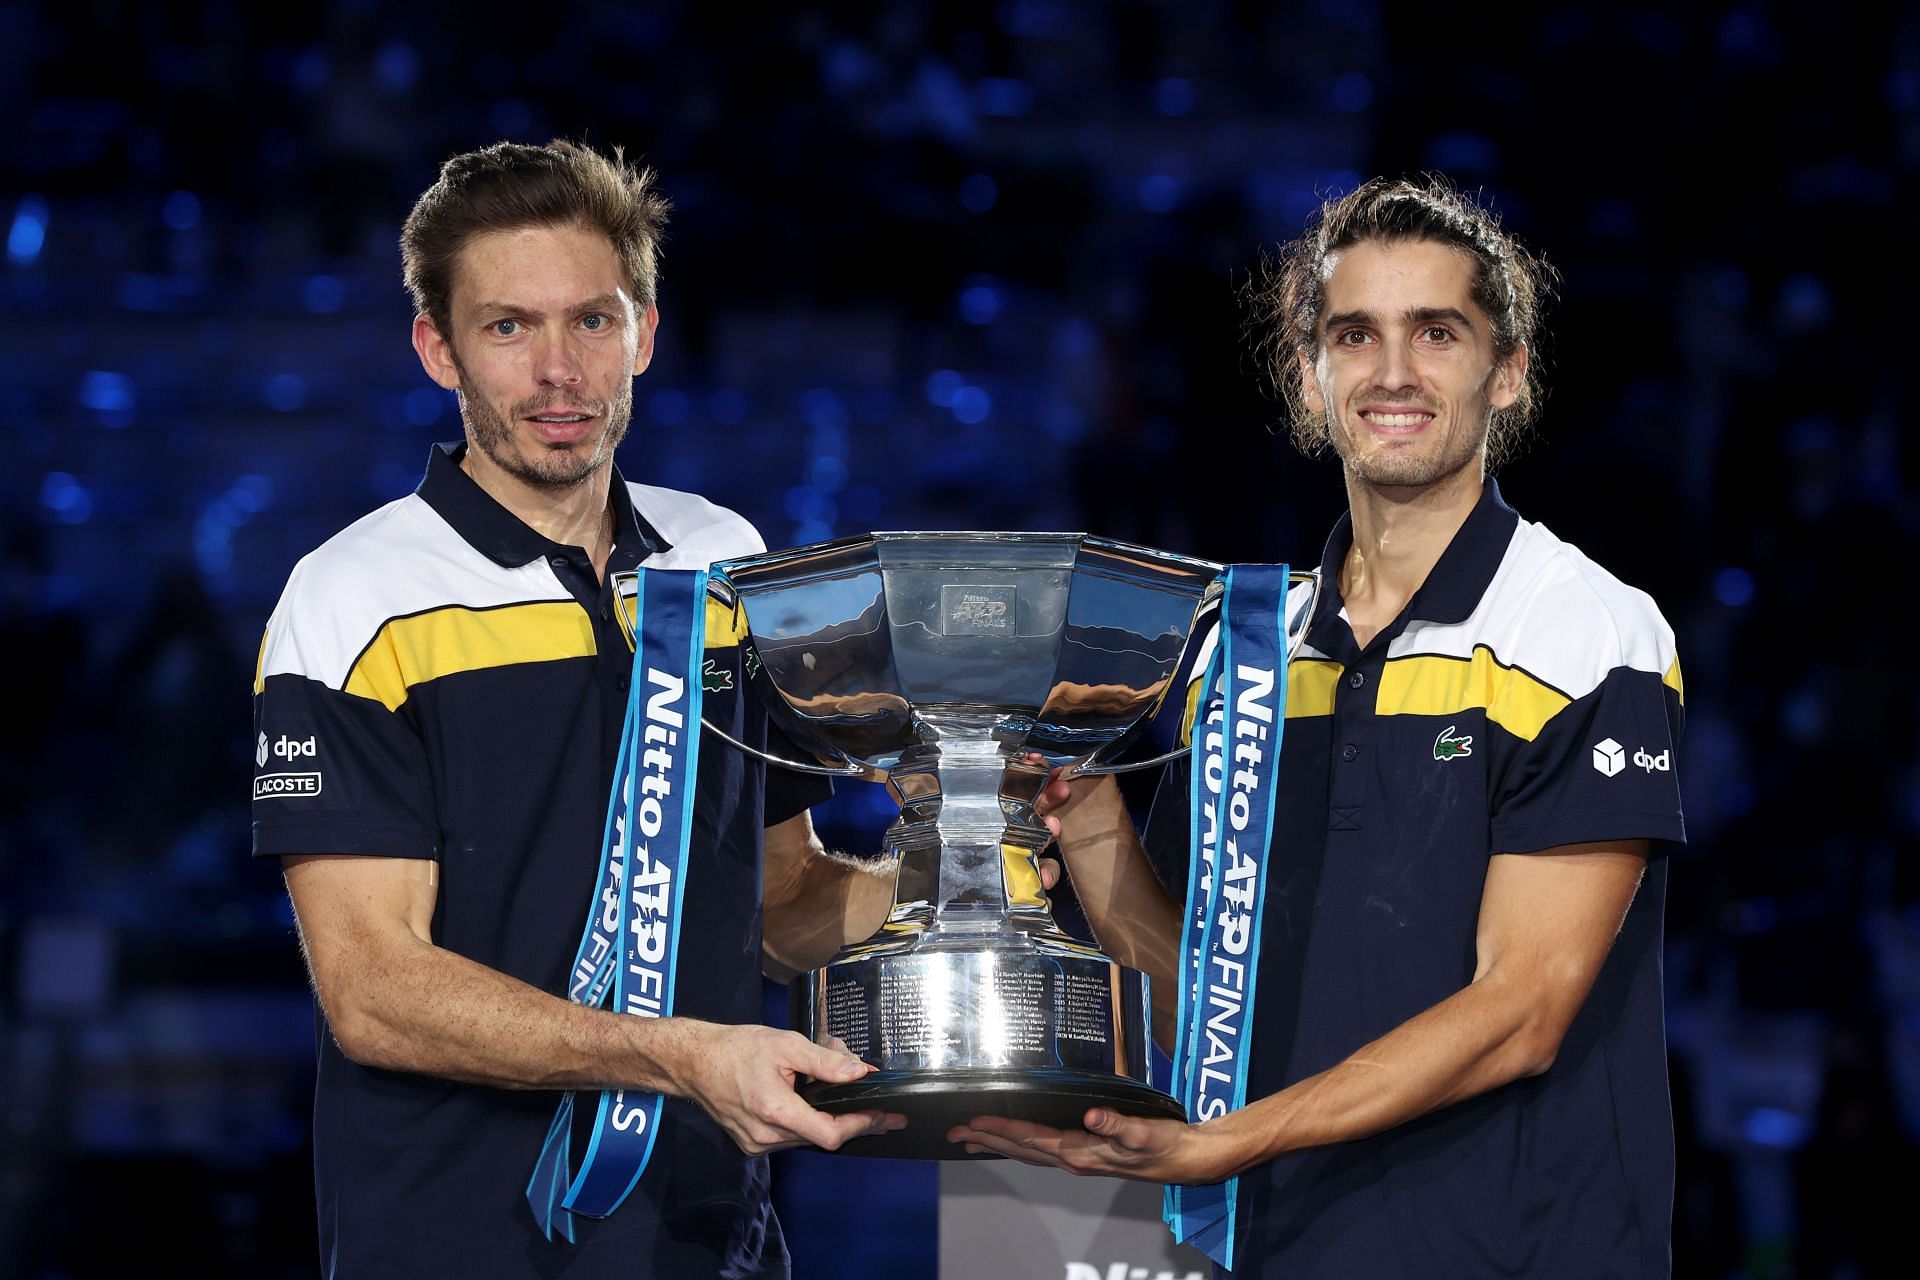 Nicolas Mahut and Pierre-Hugues Herbert celebrate after winning the 2021 Nitto ATP World Tour Finals